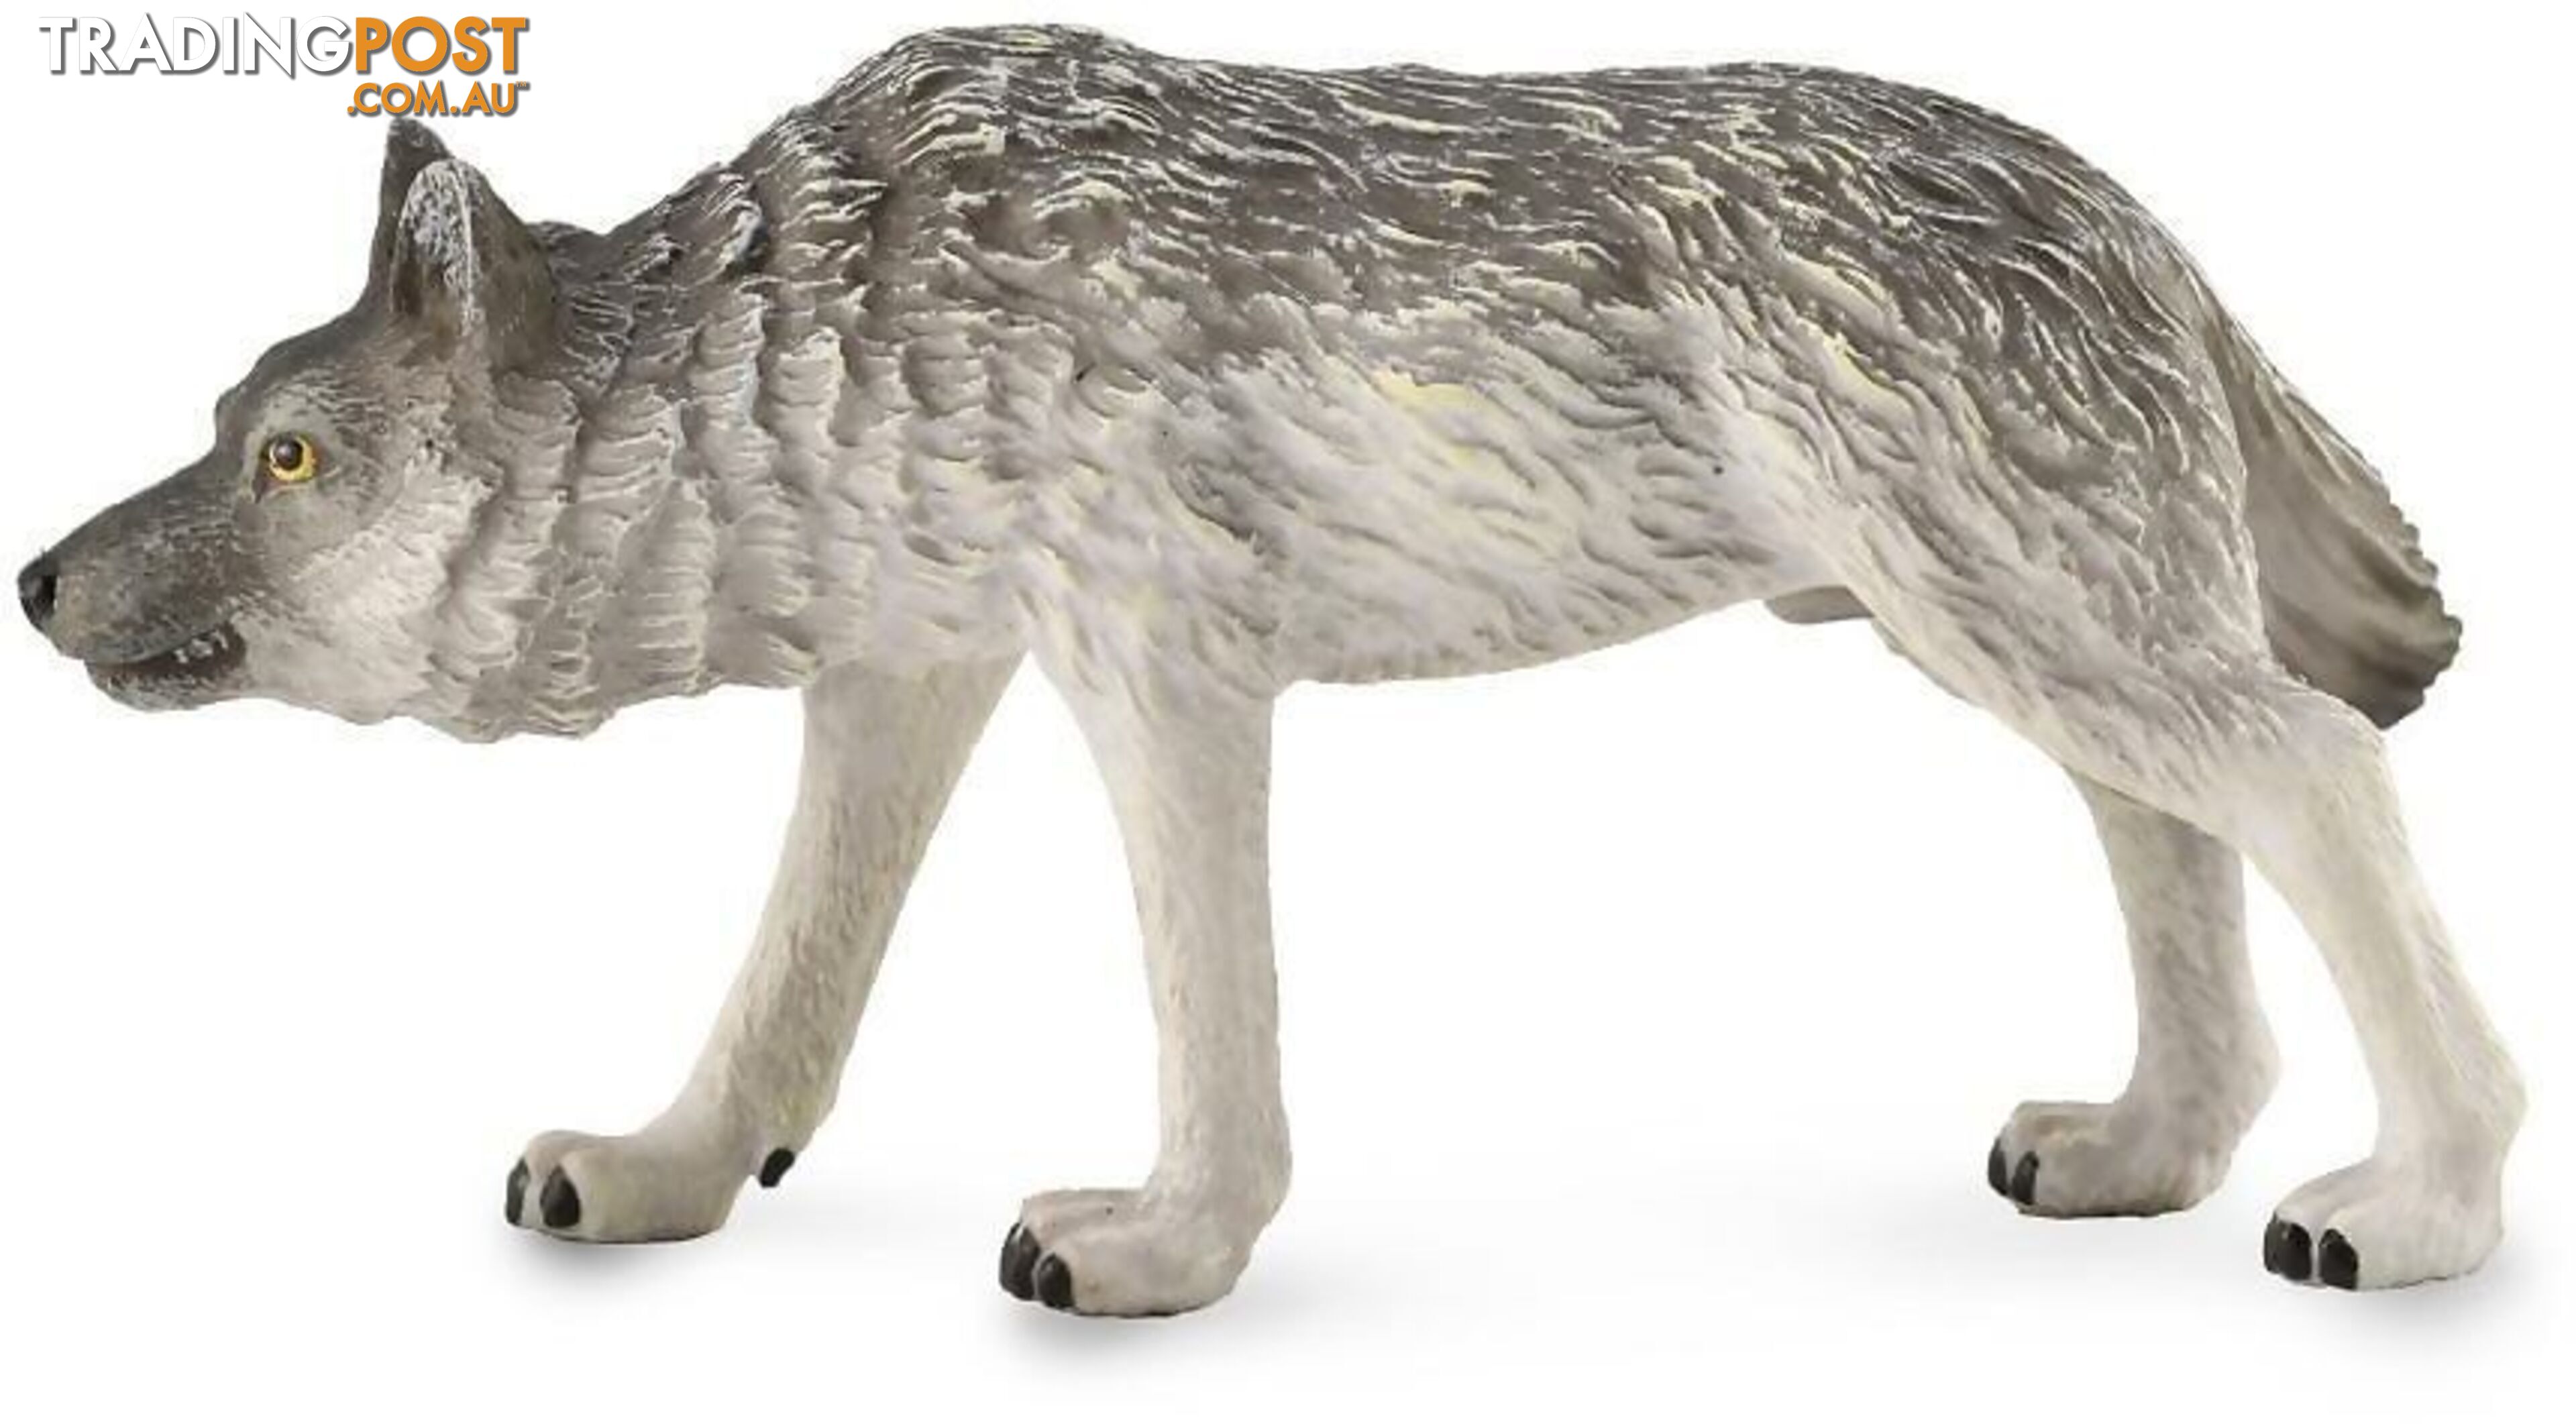 CollectA - Timber Wolf Hunting Figurine - Rpco88845 - 4892900888453